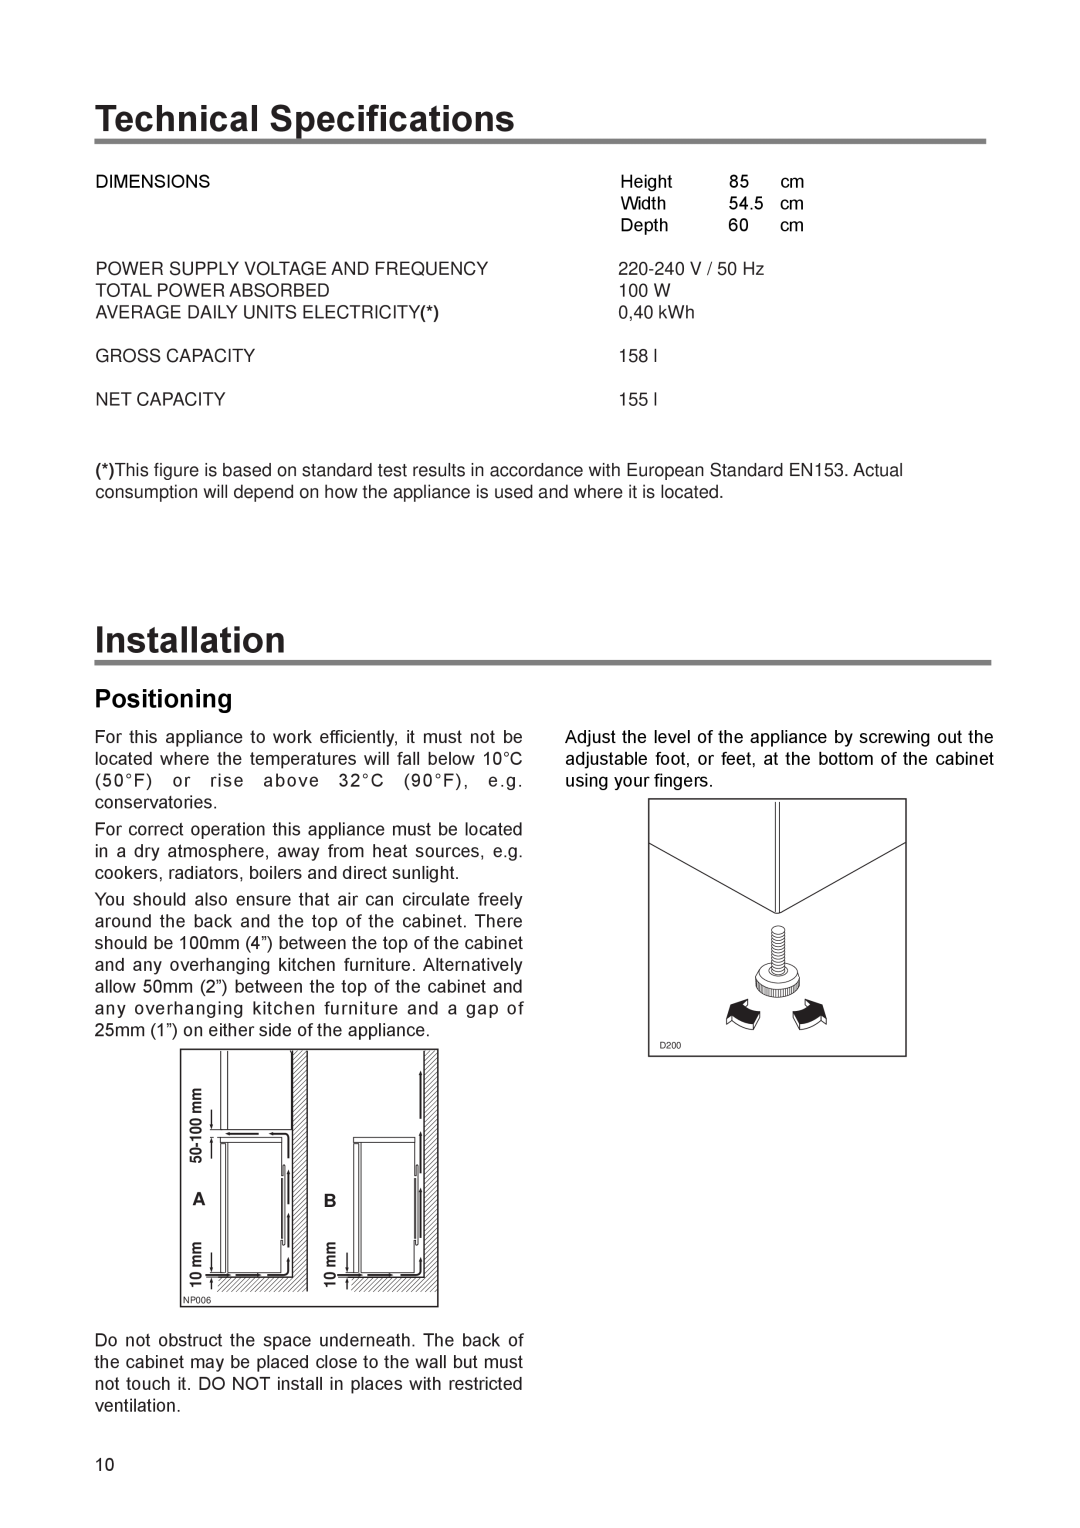 Zanussi ZL 66 SI manual Technical Specifications, Installation, Positioning 